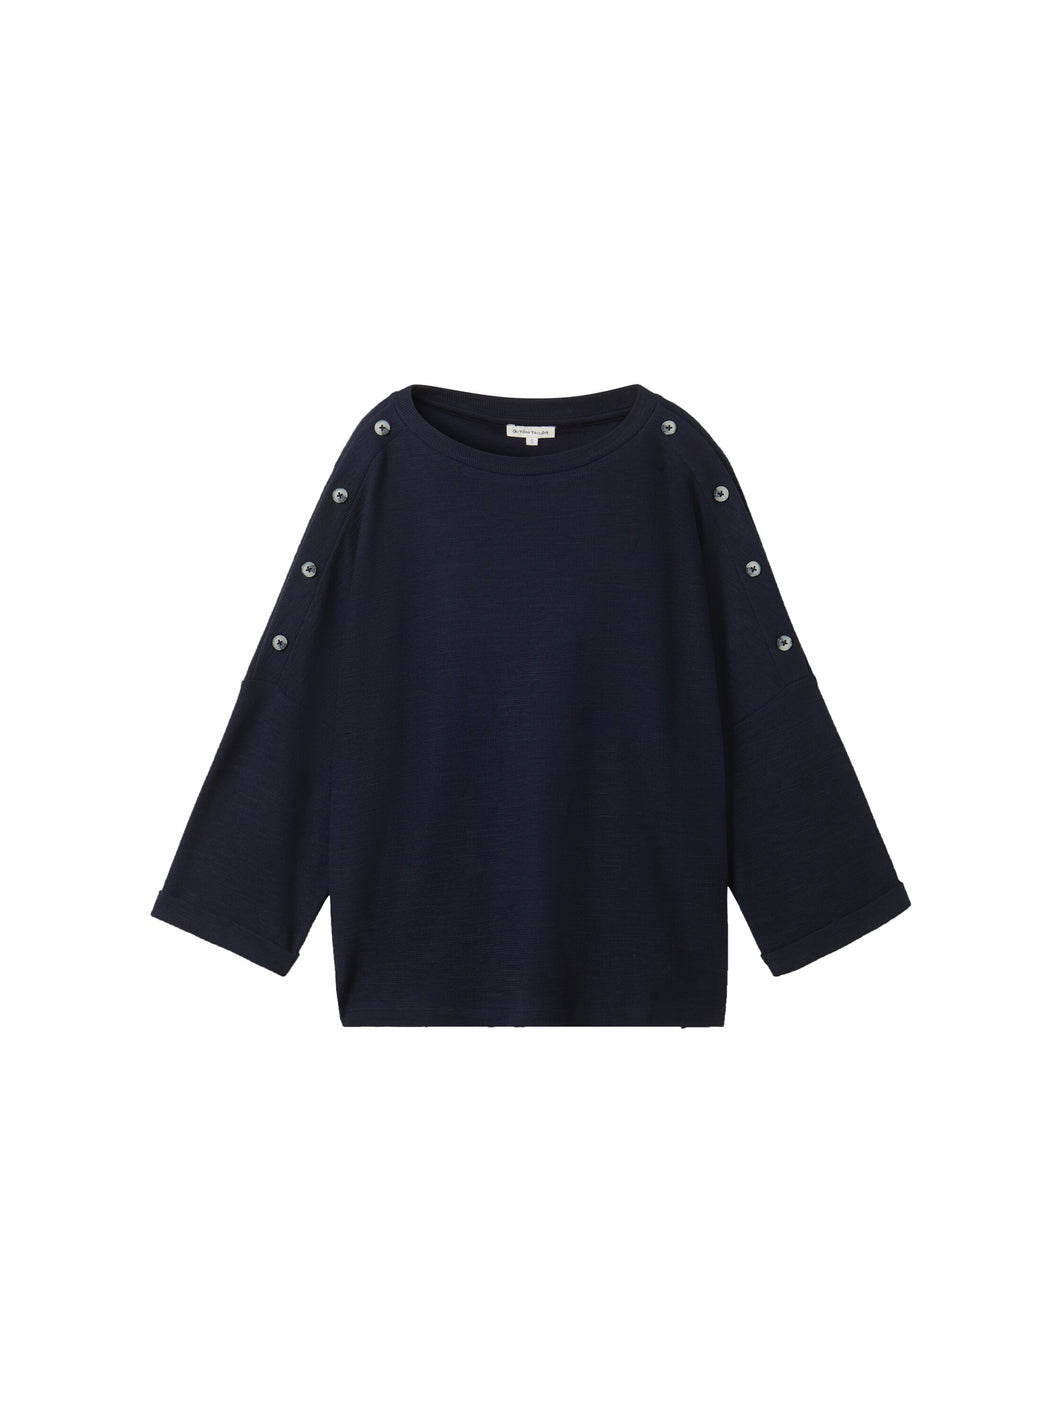 TOM TAILOR T-SHIRT WITH BUTTONS sky captain blue